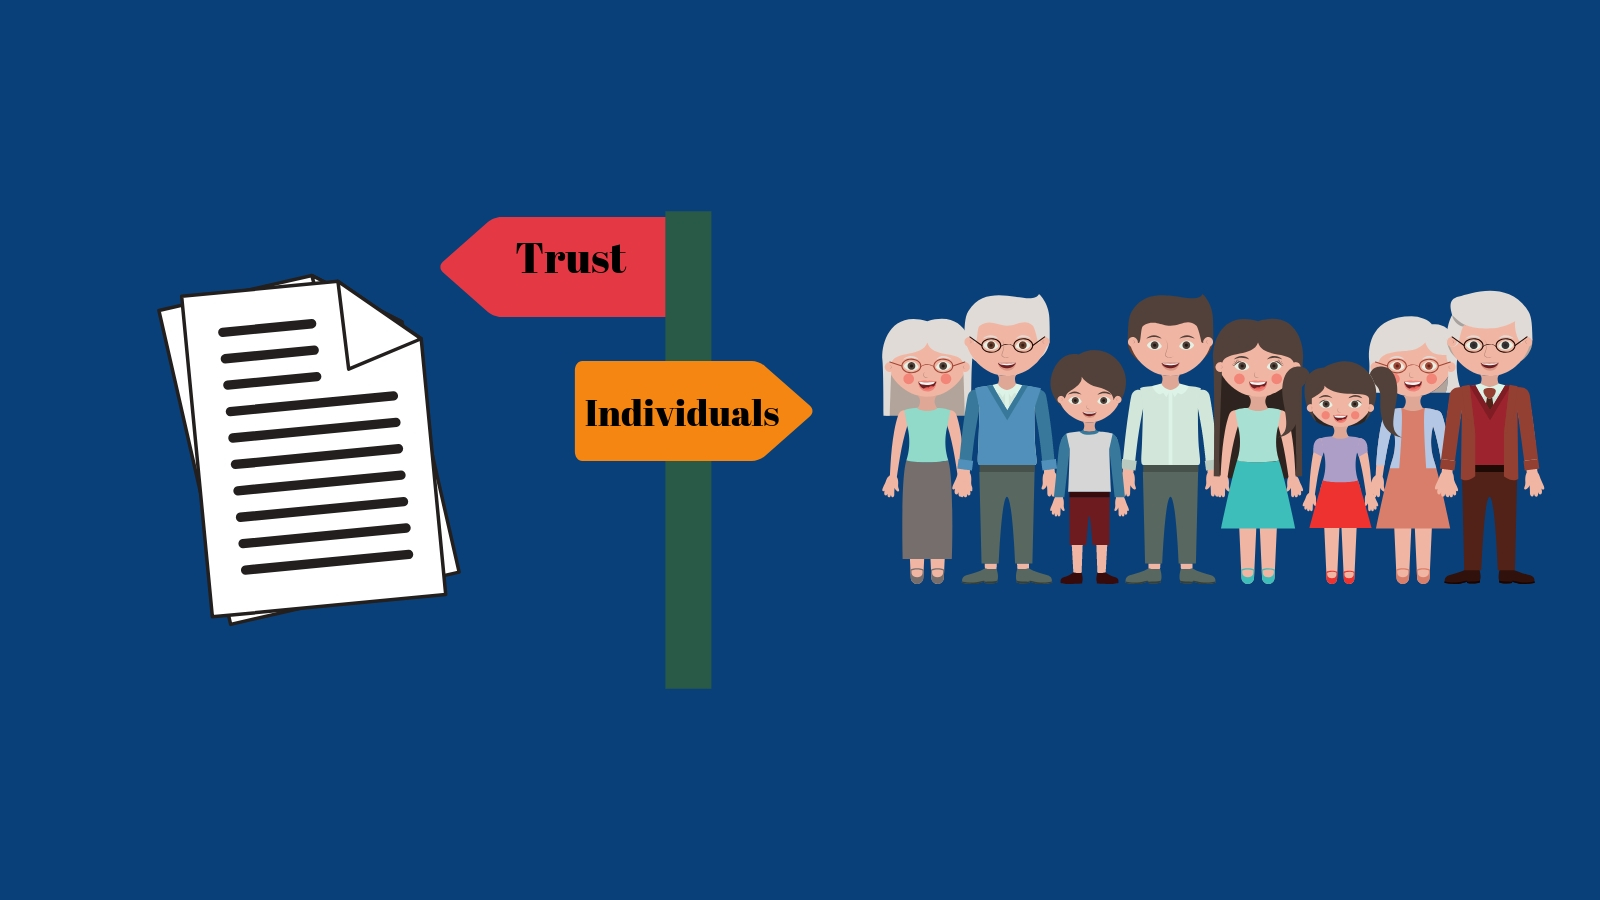 Should Trust be Beneficiaries